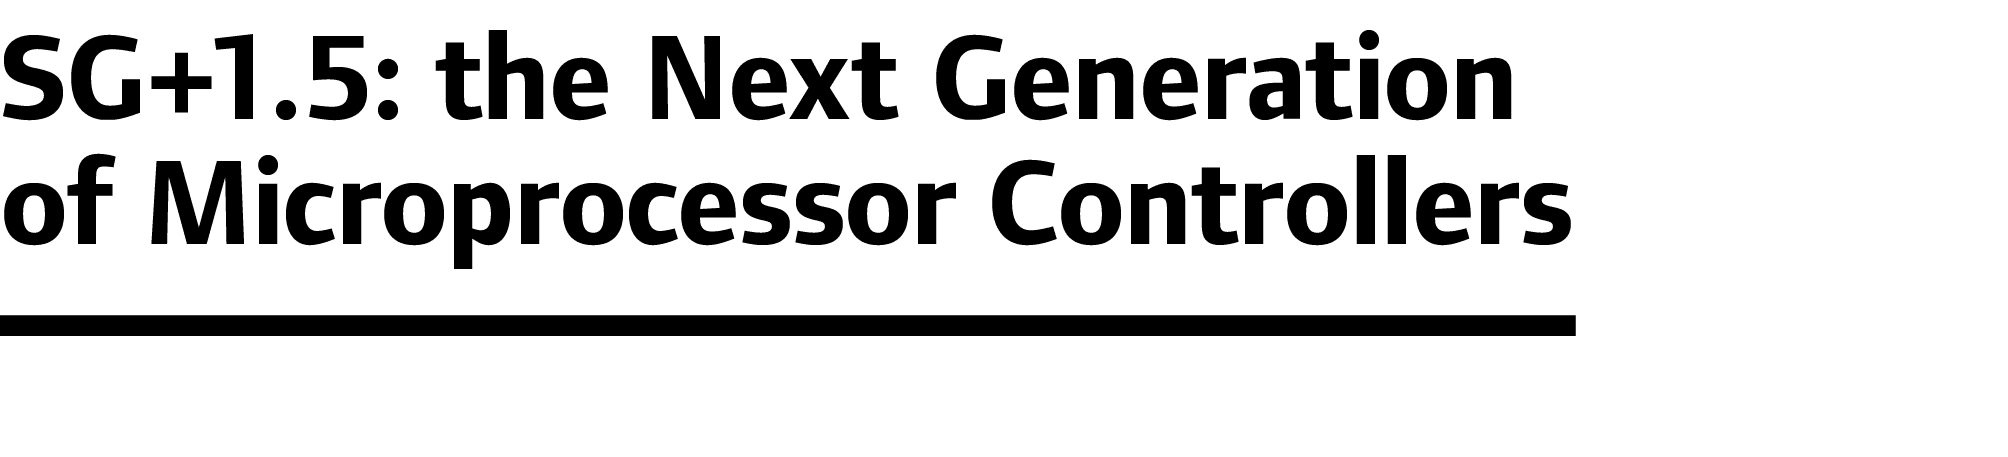 SG+1.5: the Next Generation of Microprocessor Controllers 